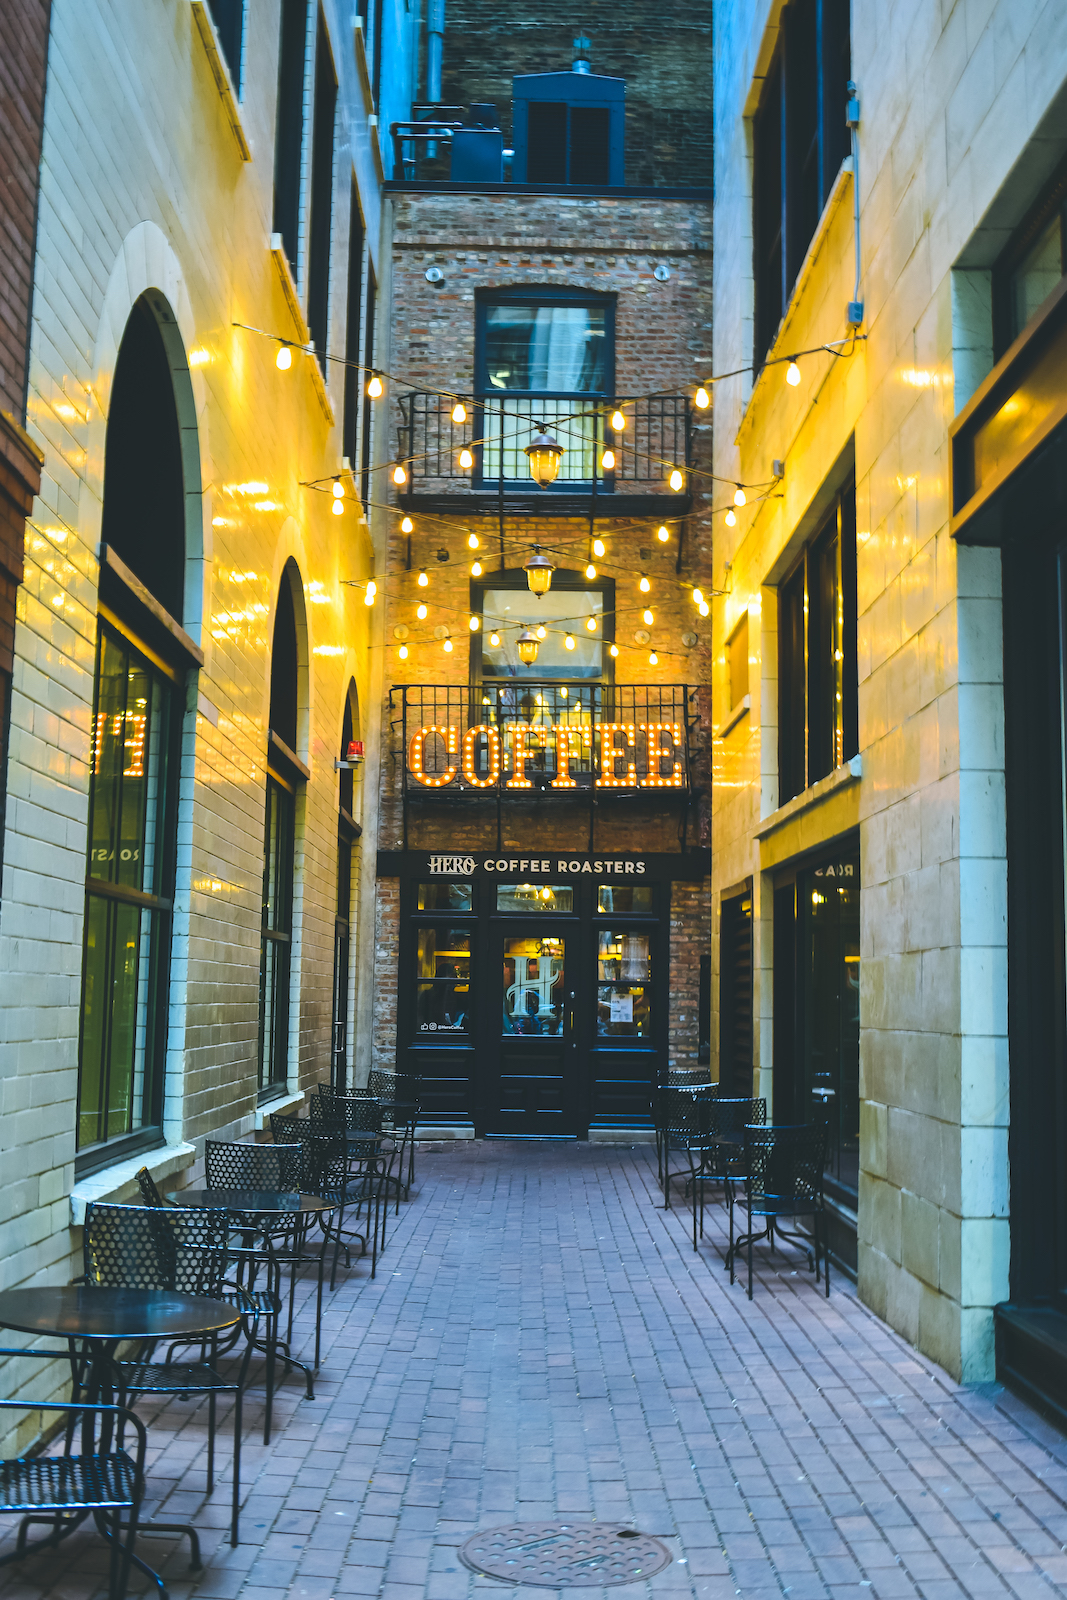 A First Timers Weekend City Guide to Chicago Pickwick Lane Coffee House Travel guide to chicago illinois blog what to do what to see where to go 3 days-56